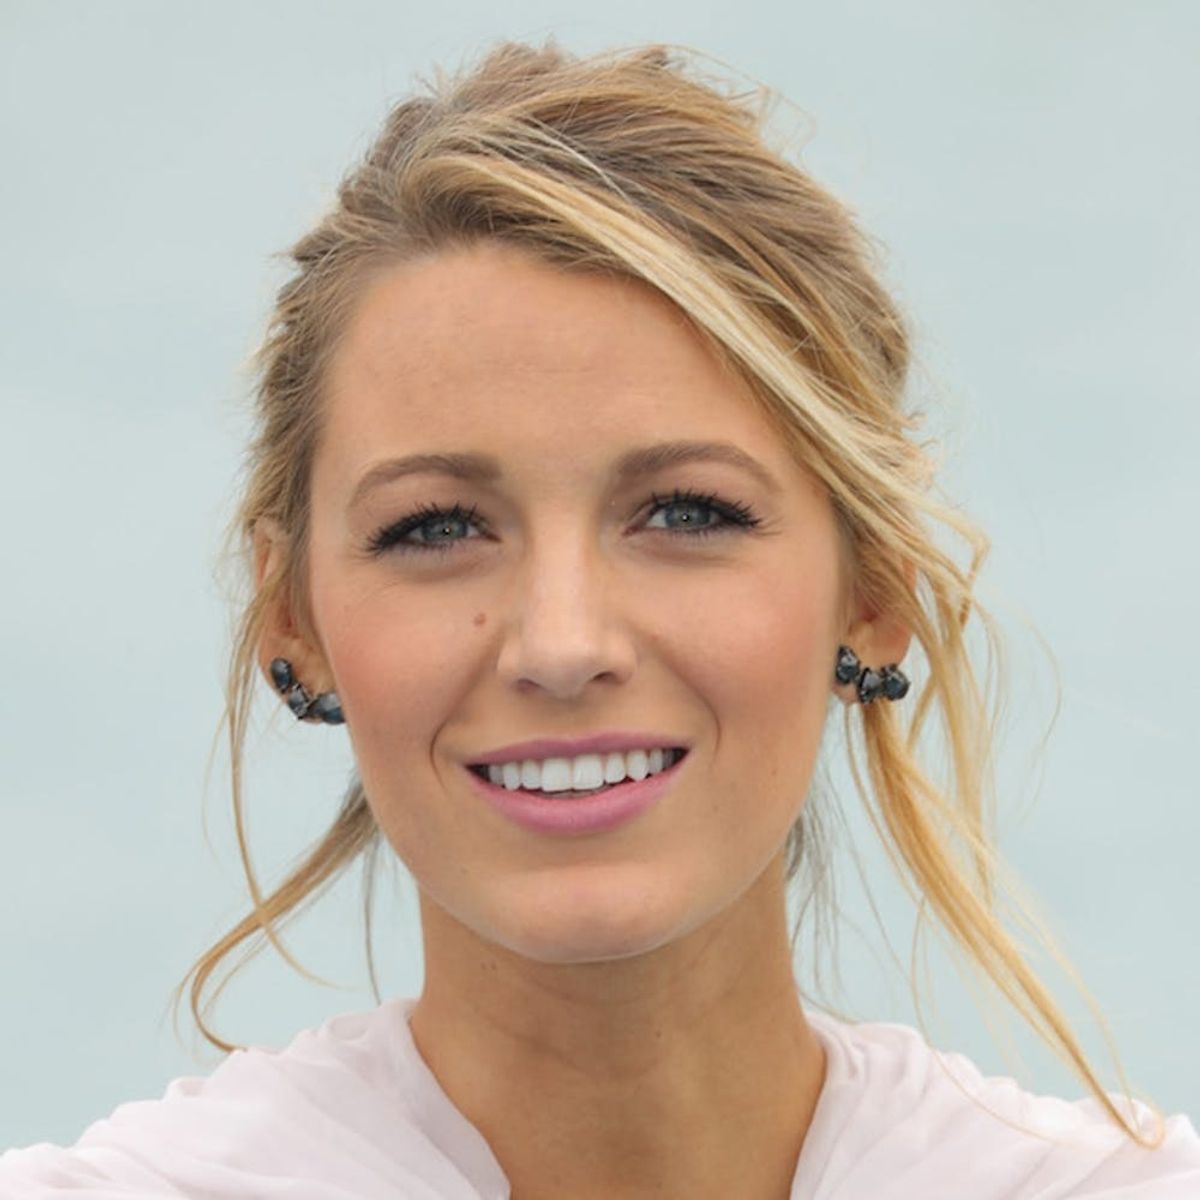 10 Ways to Rock Blake Lively’s Surprising New Jewelry Look